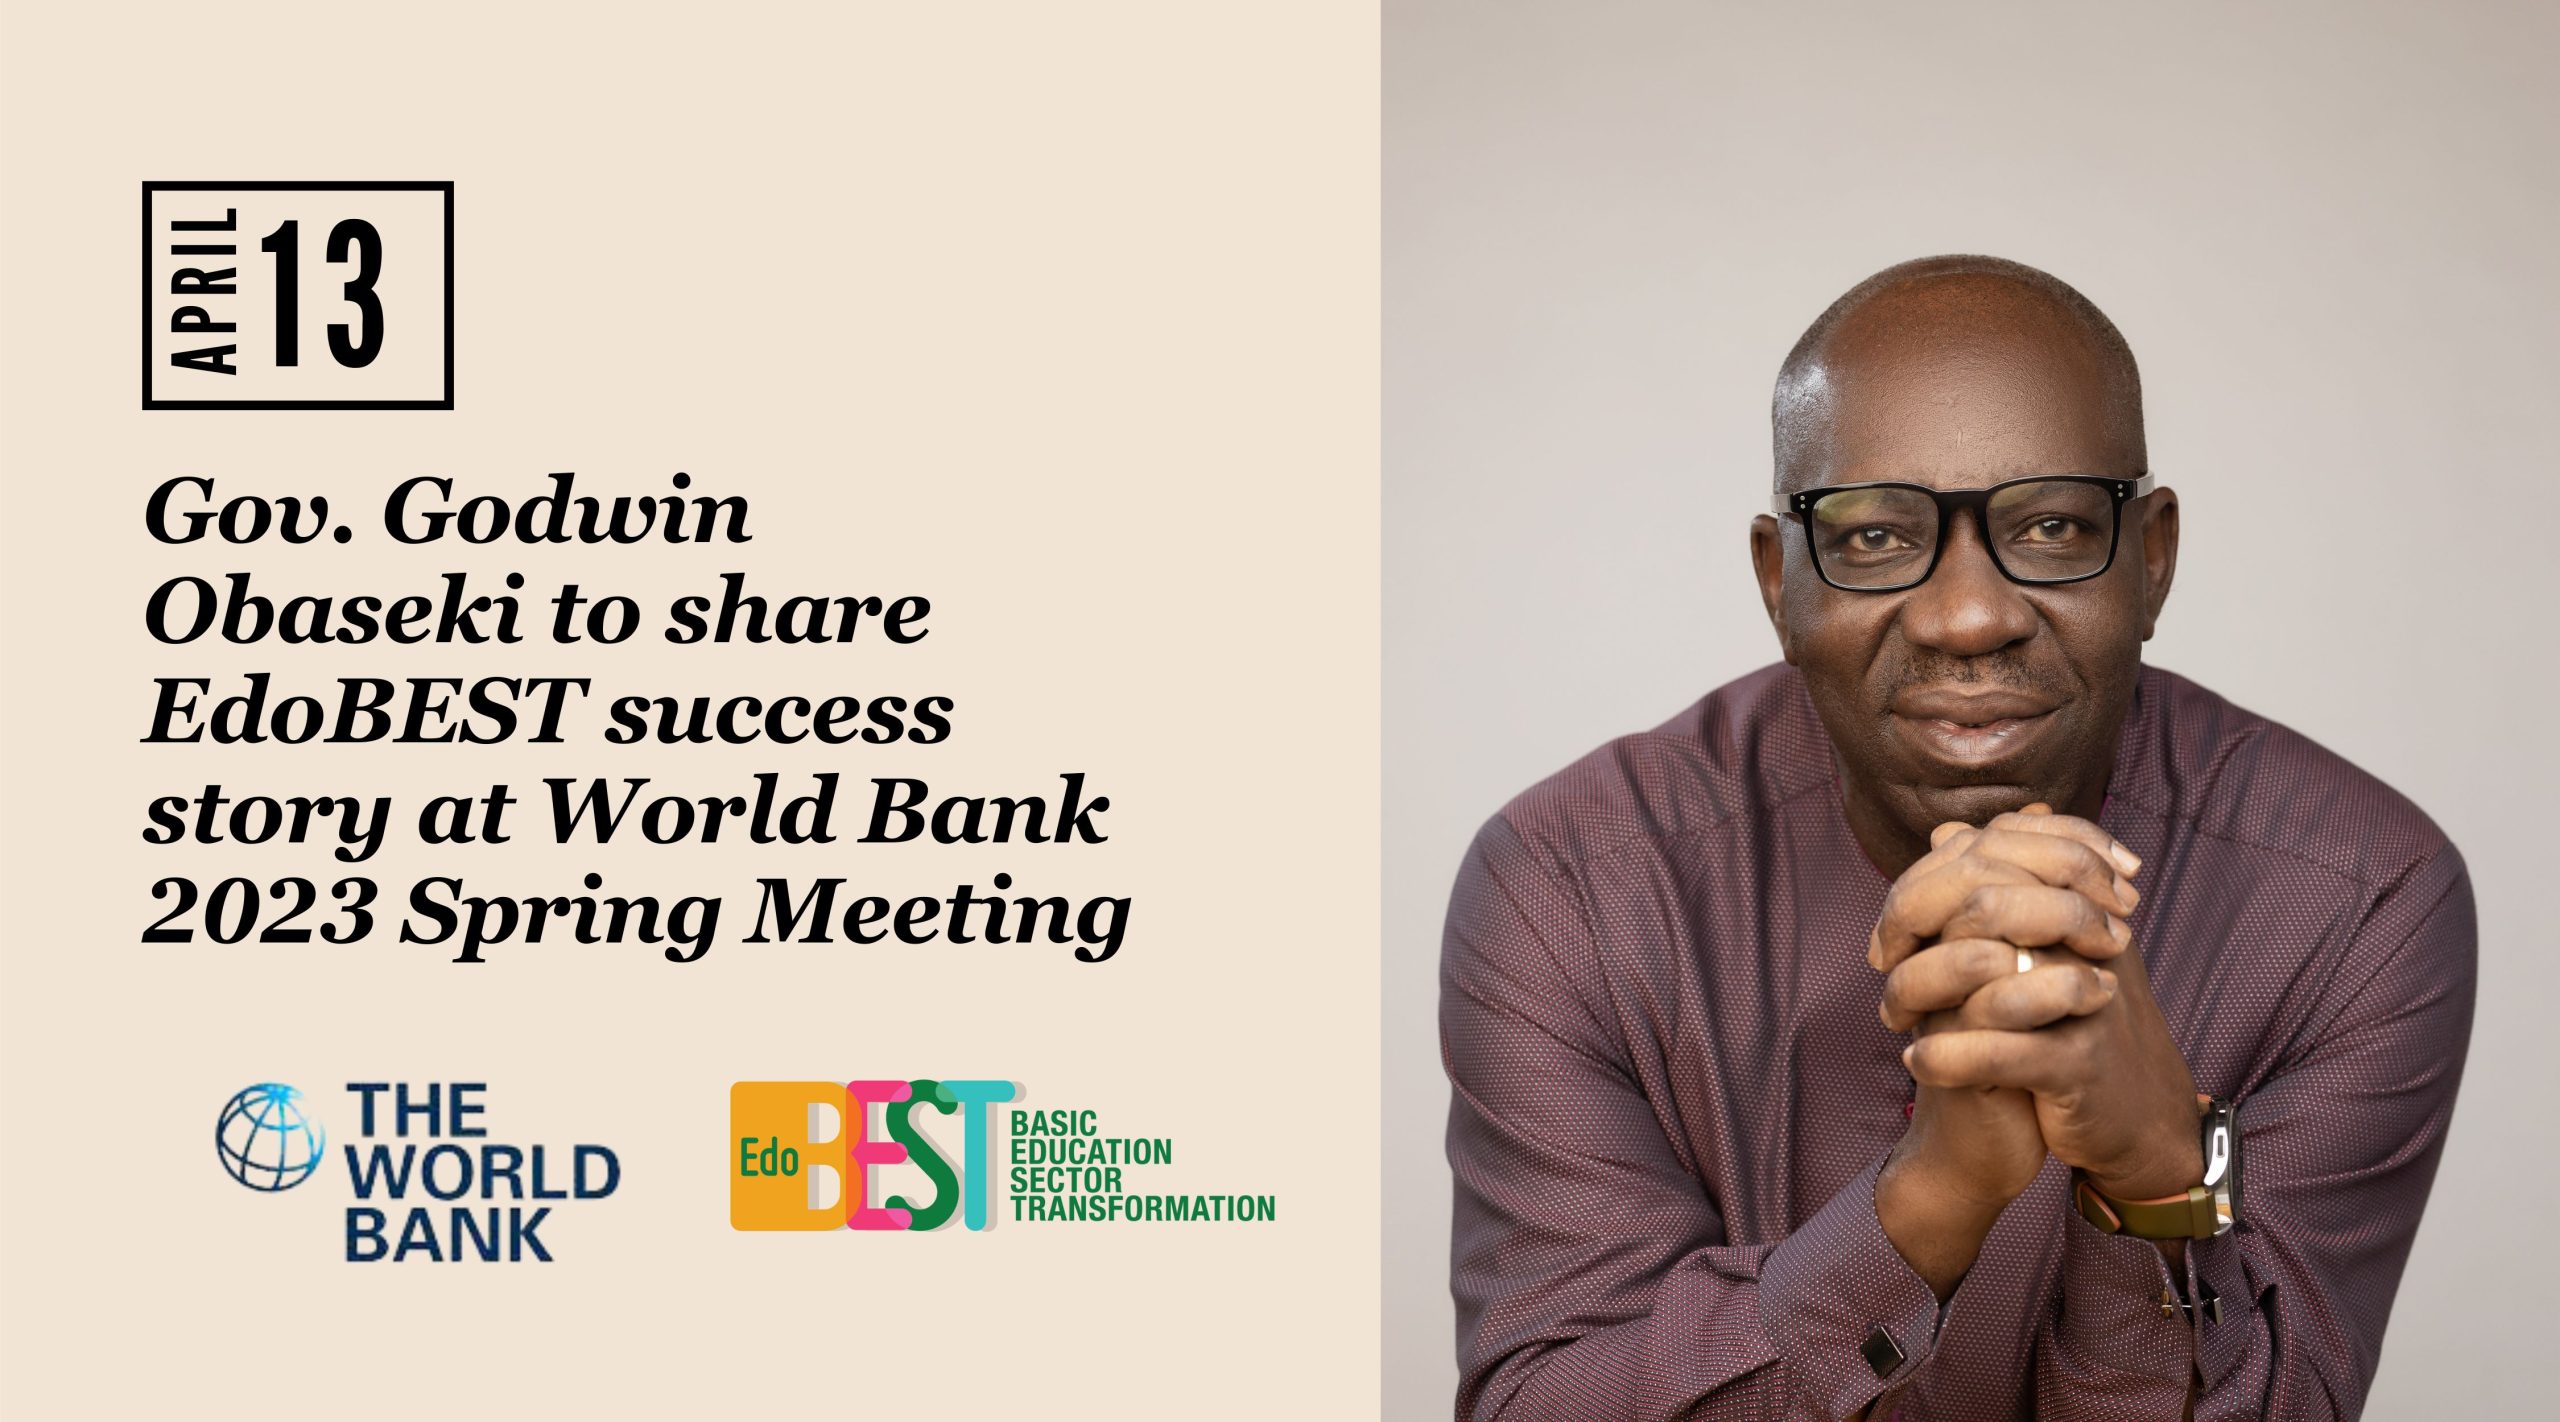 Poster featuring Governor Godwin Obaseki